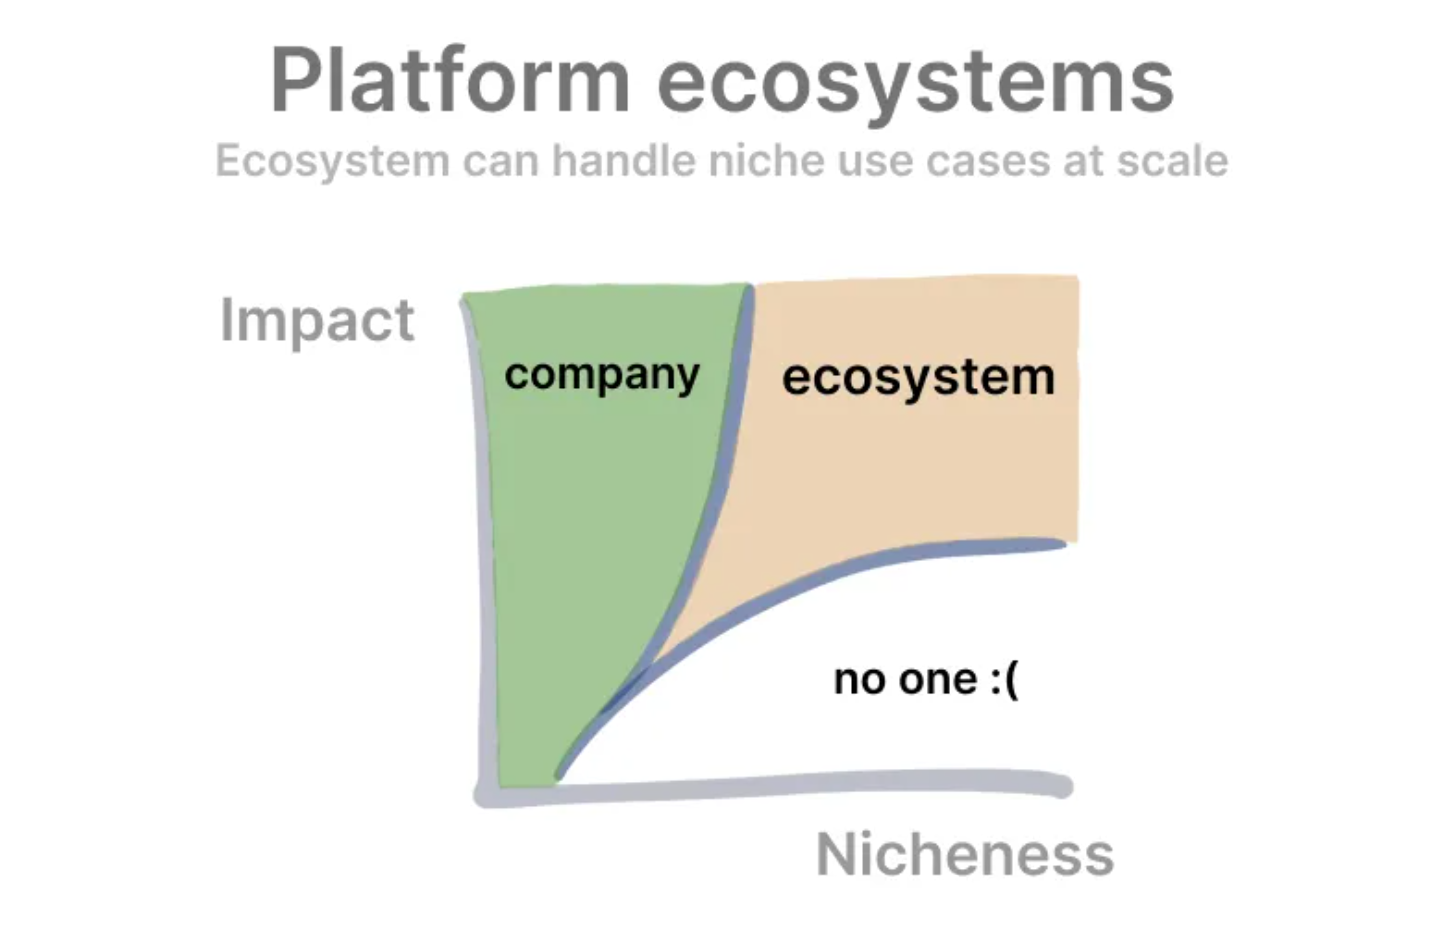 Kevin Kwok&rsquo;s diagram on platform ecosystems